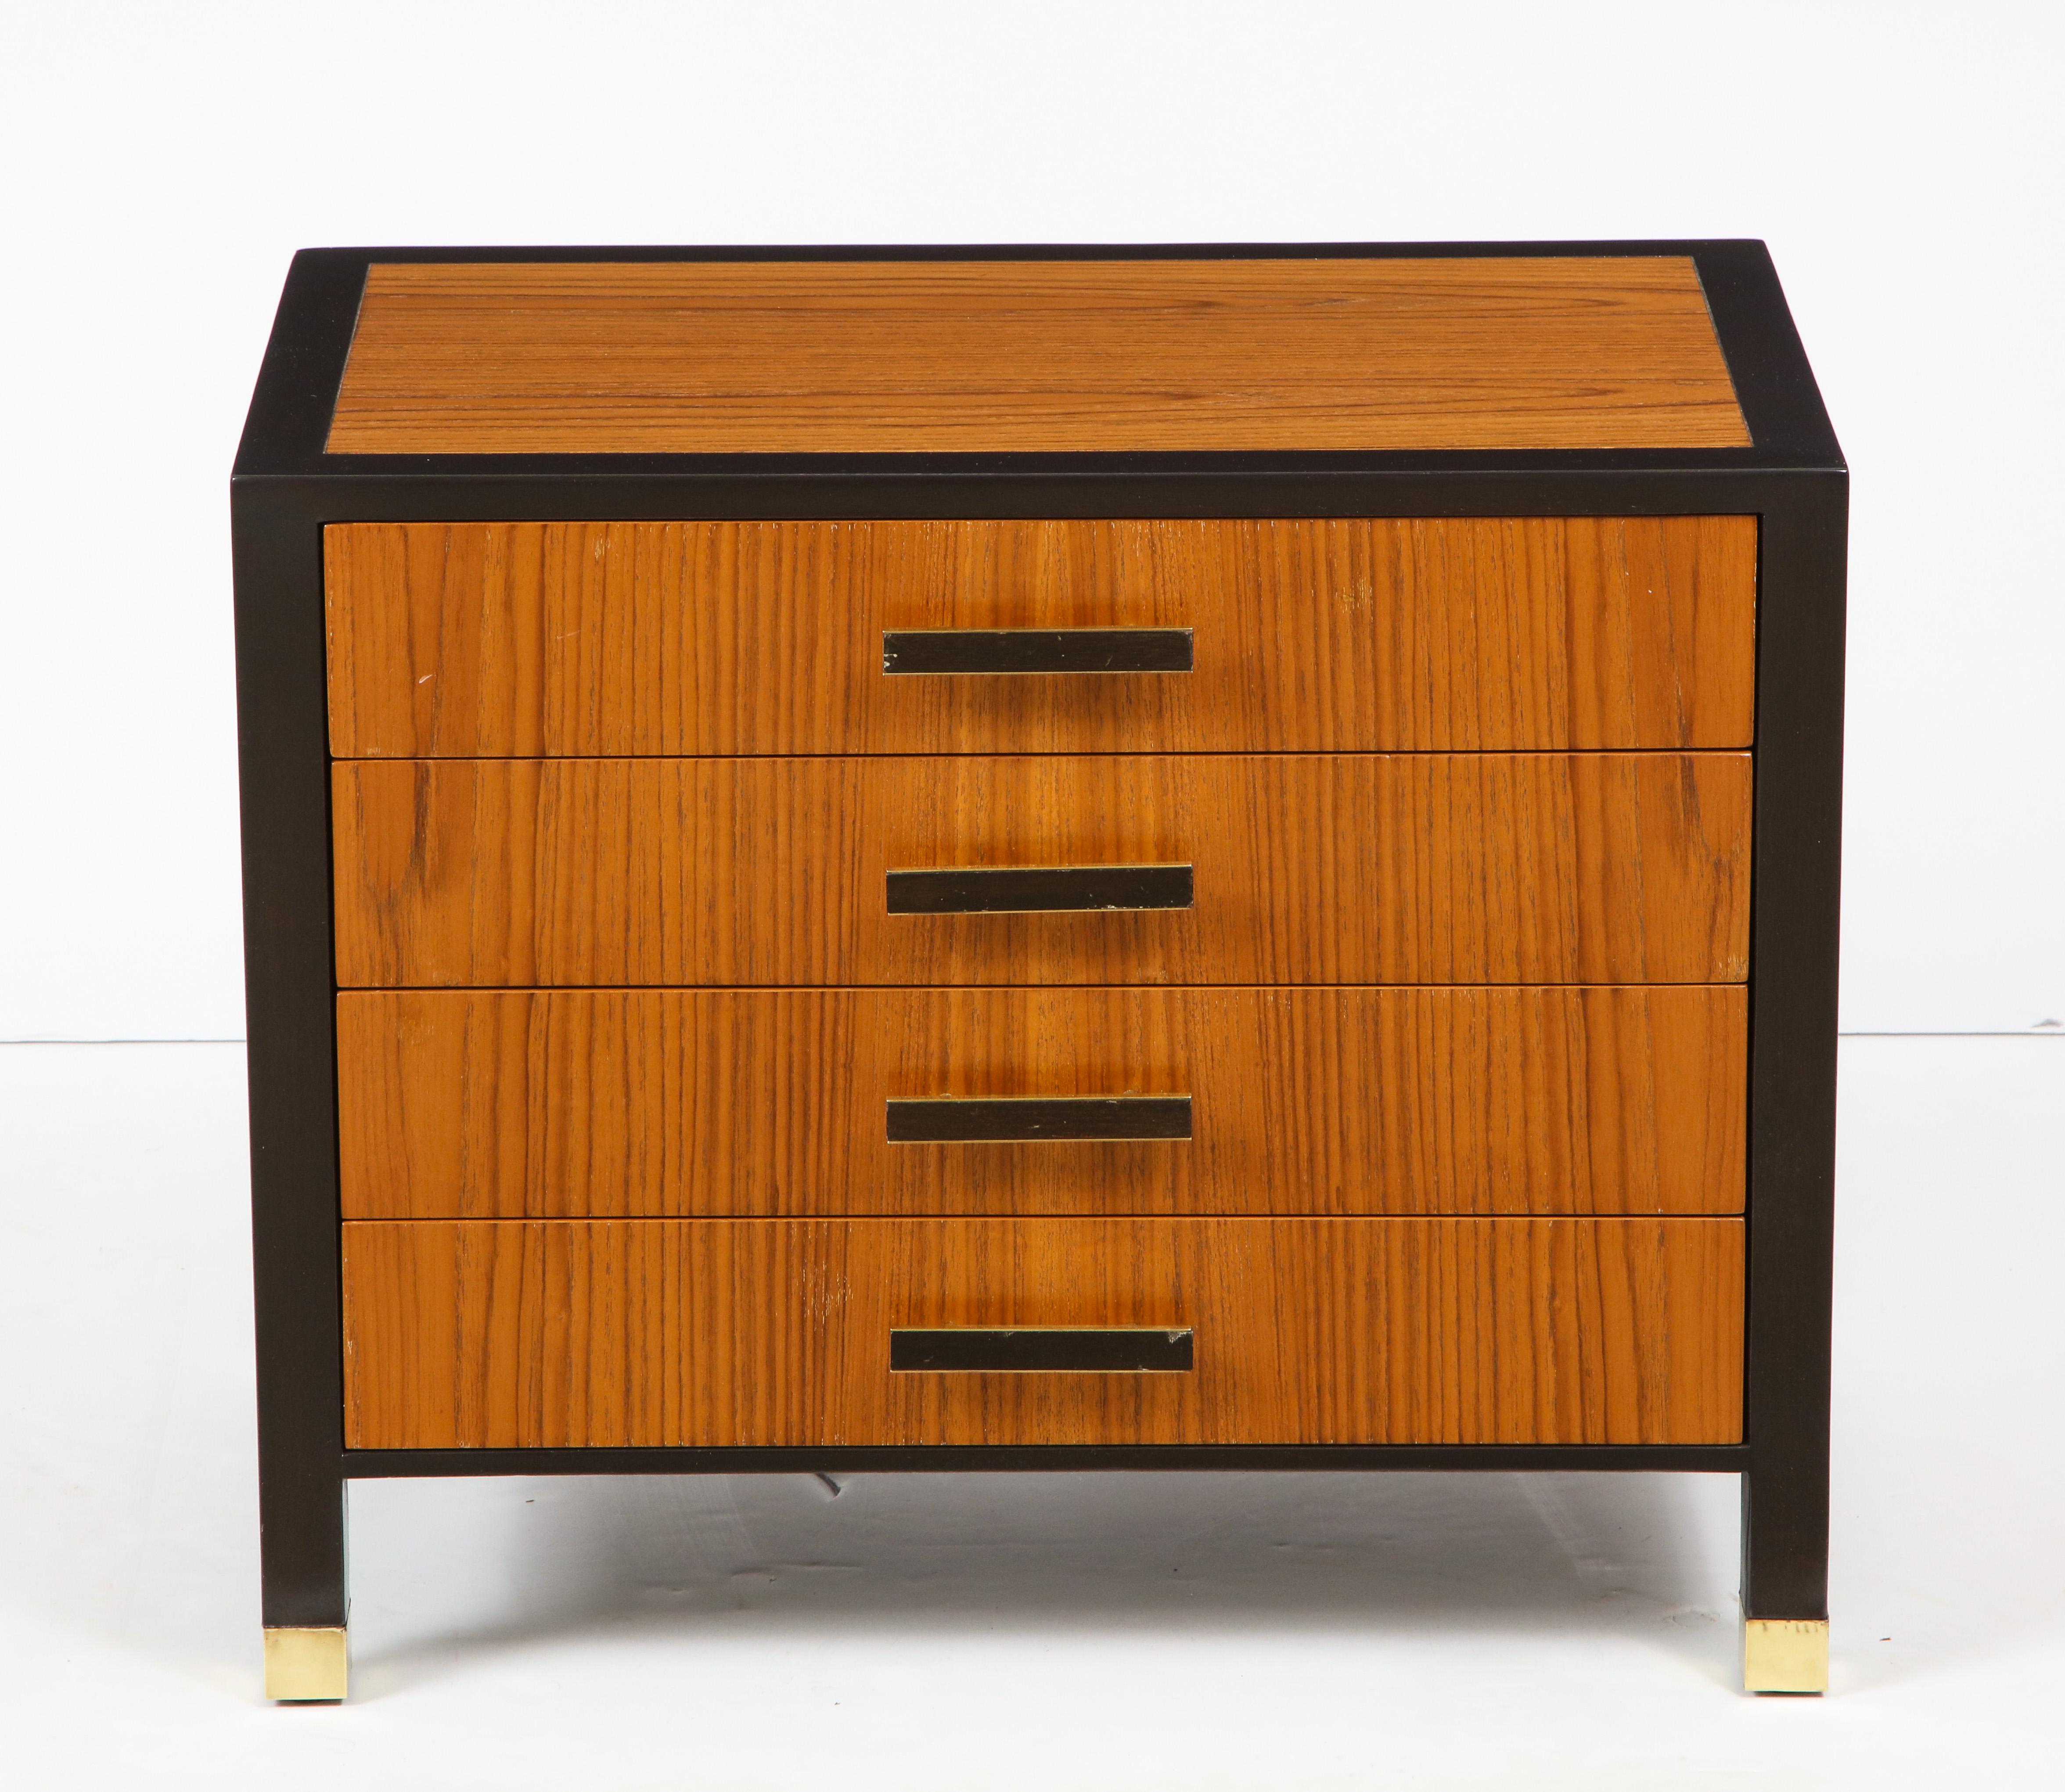 Pair of midcentury nightstands with classic styling, featuring rosewood panels banded in ebonized mahogany, each having 4 drawers which provide ample storage. Door pulls and legs trimmed in satin brass. Signed.